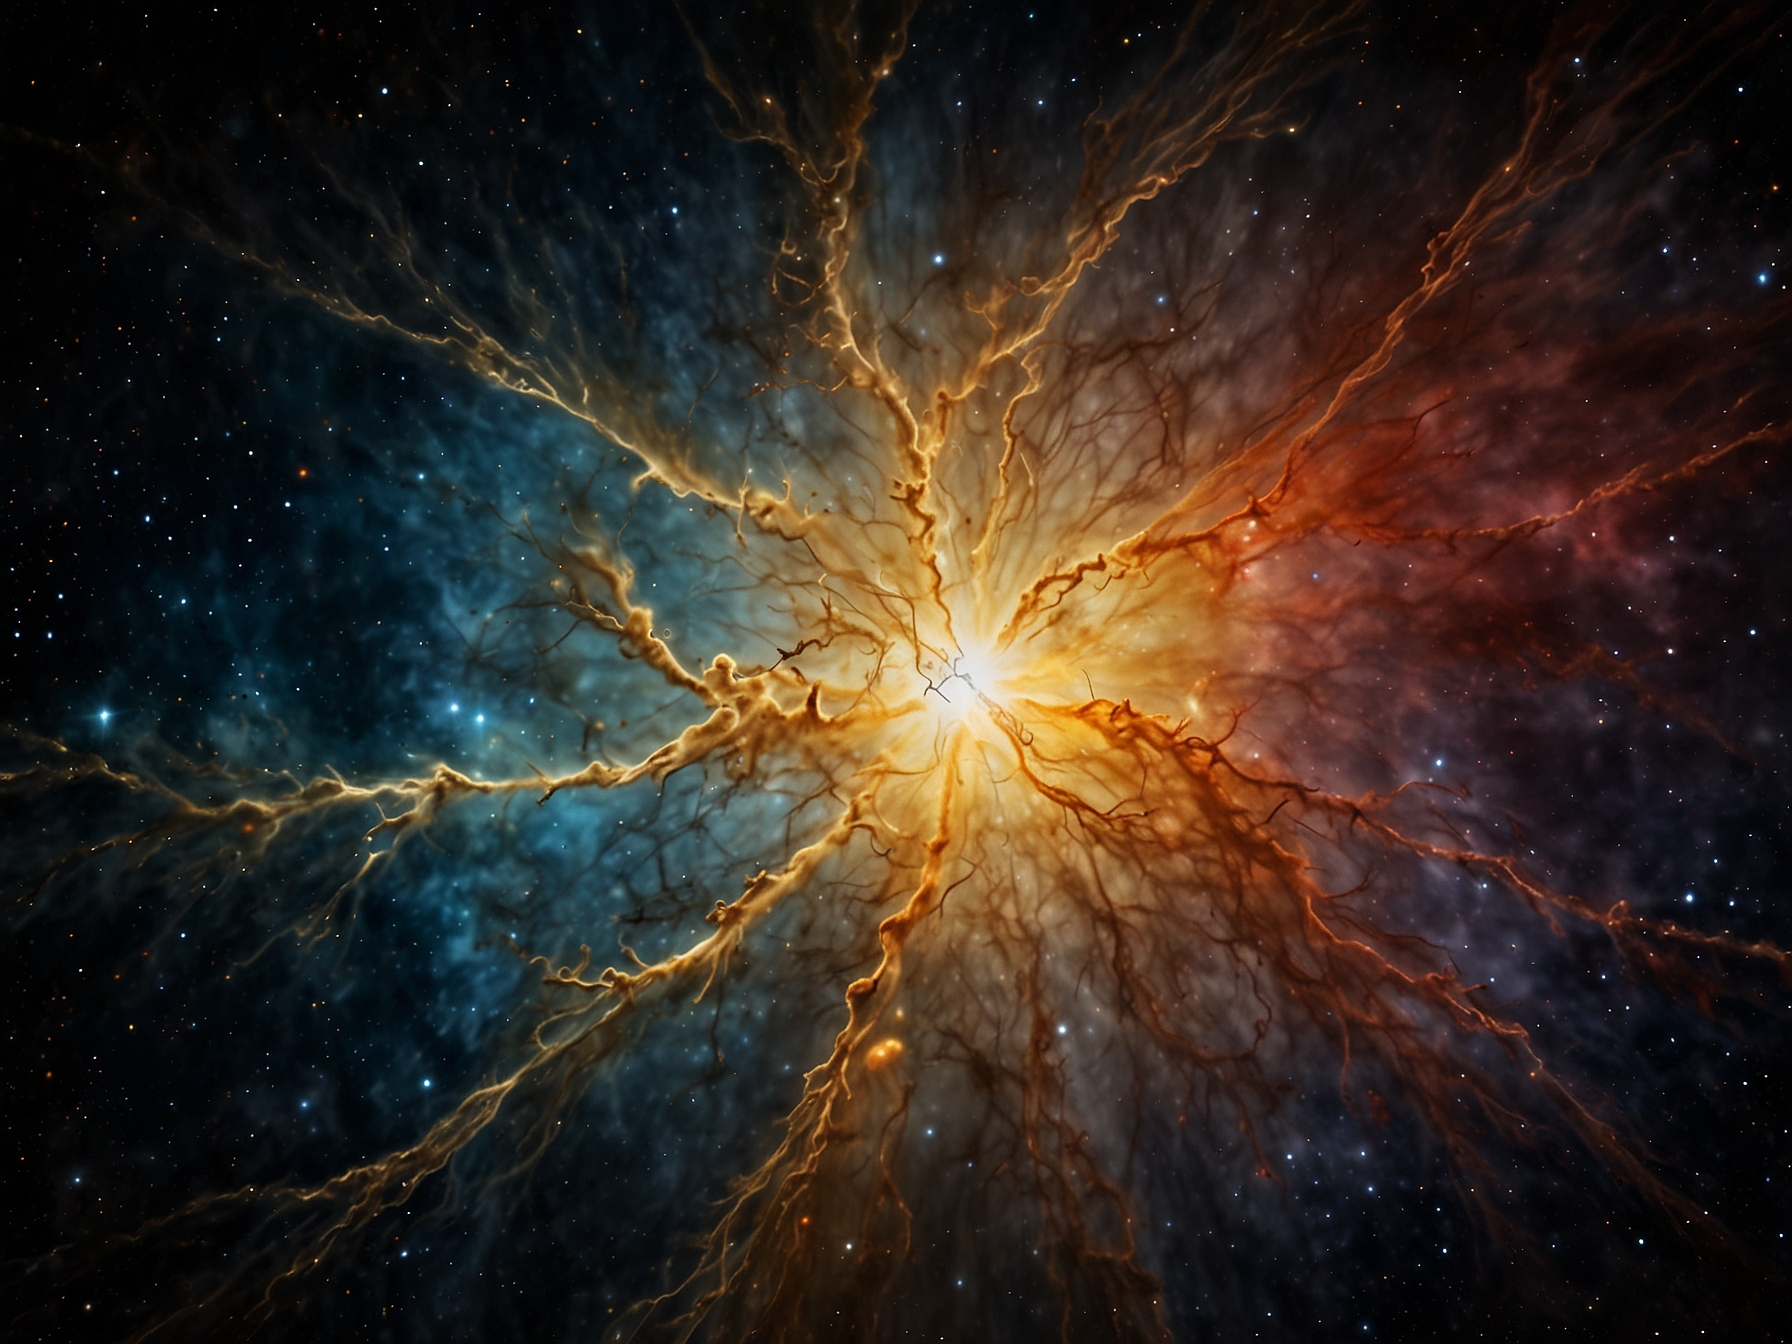 A detailed image of the pulsar at the heart of the Crab Nebula, taken using the near-infrared camera (NIRCam) on the James Webb Space Telescope, highlighting the nebula's dynamic structures and energetic processes.